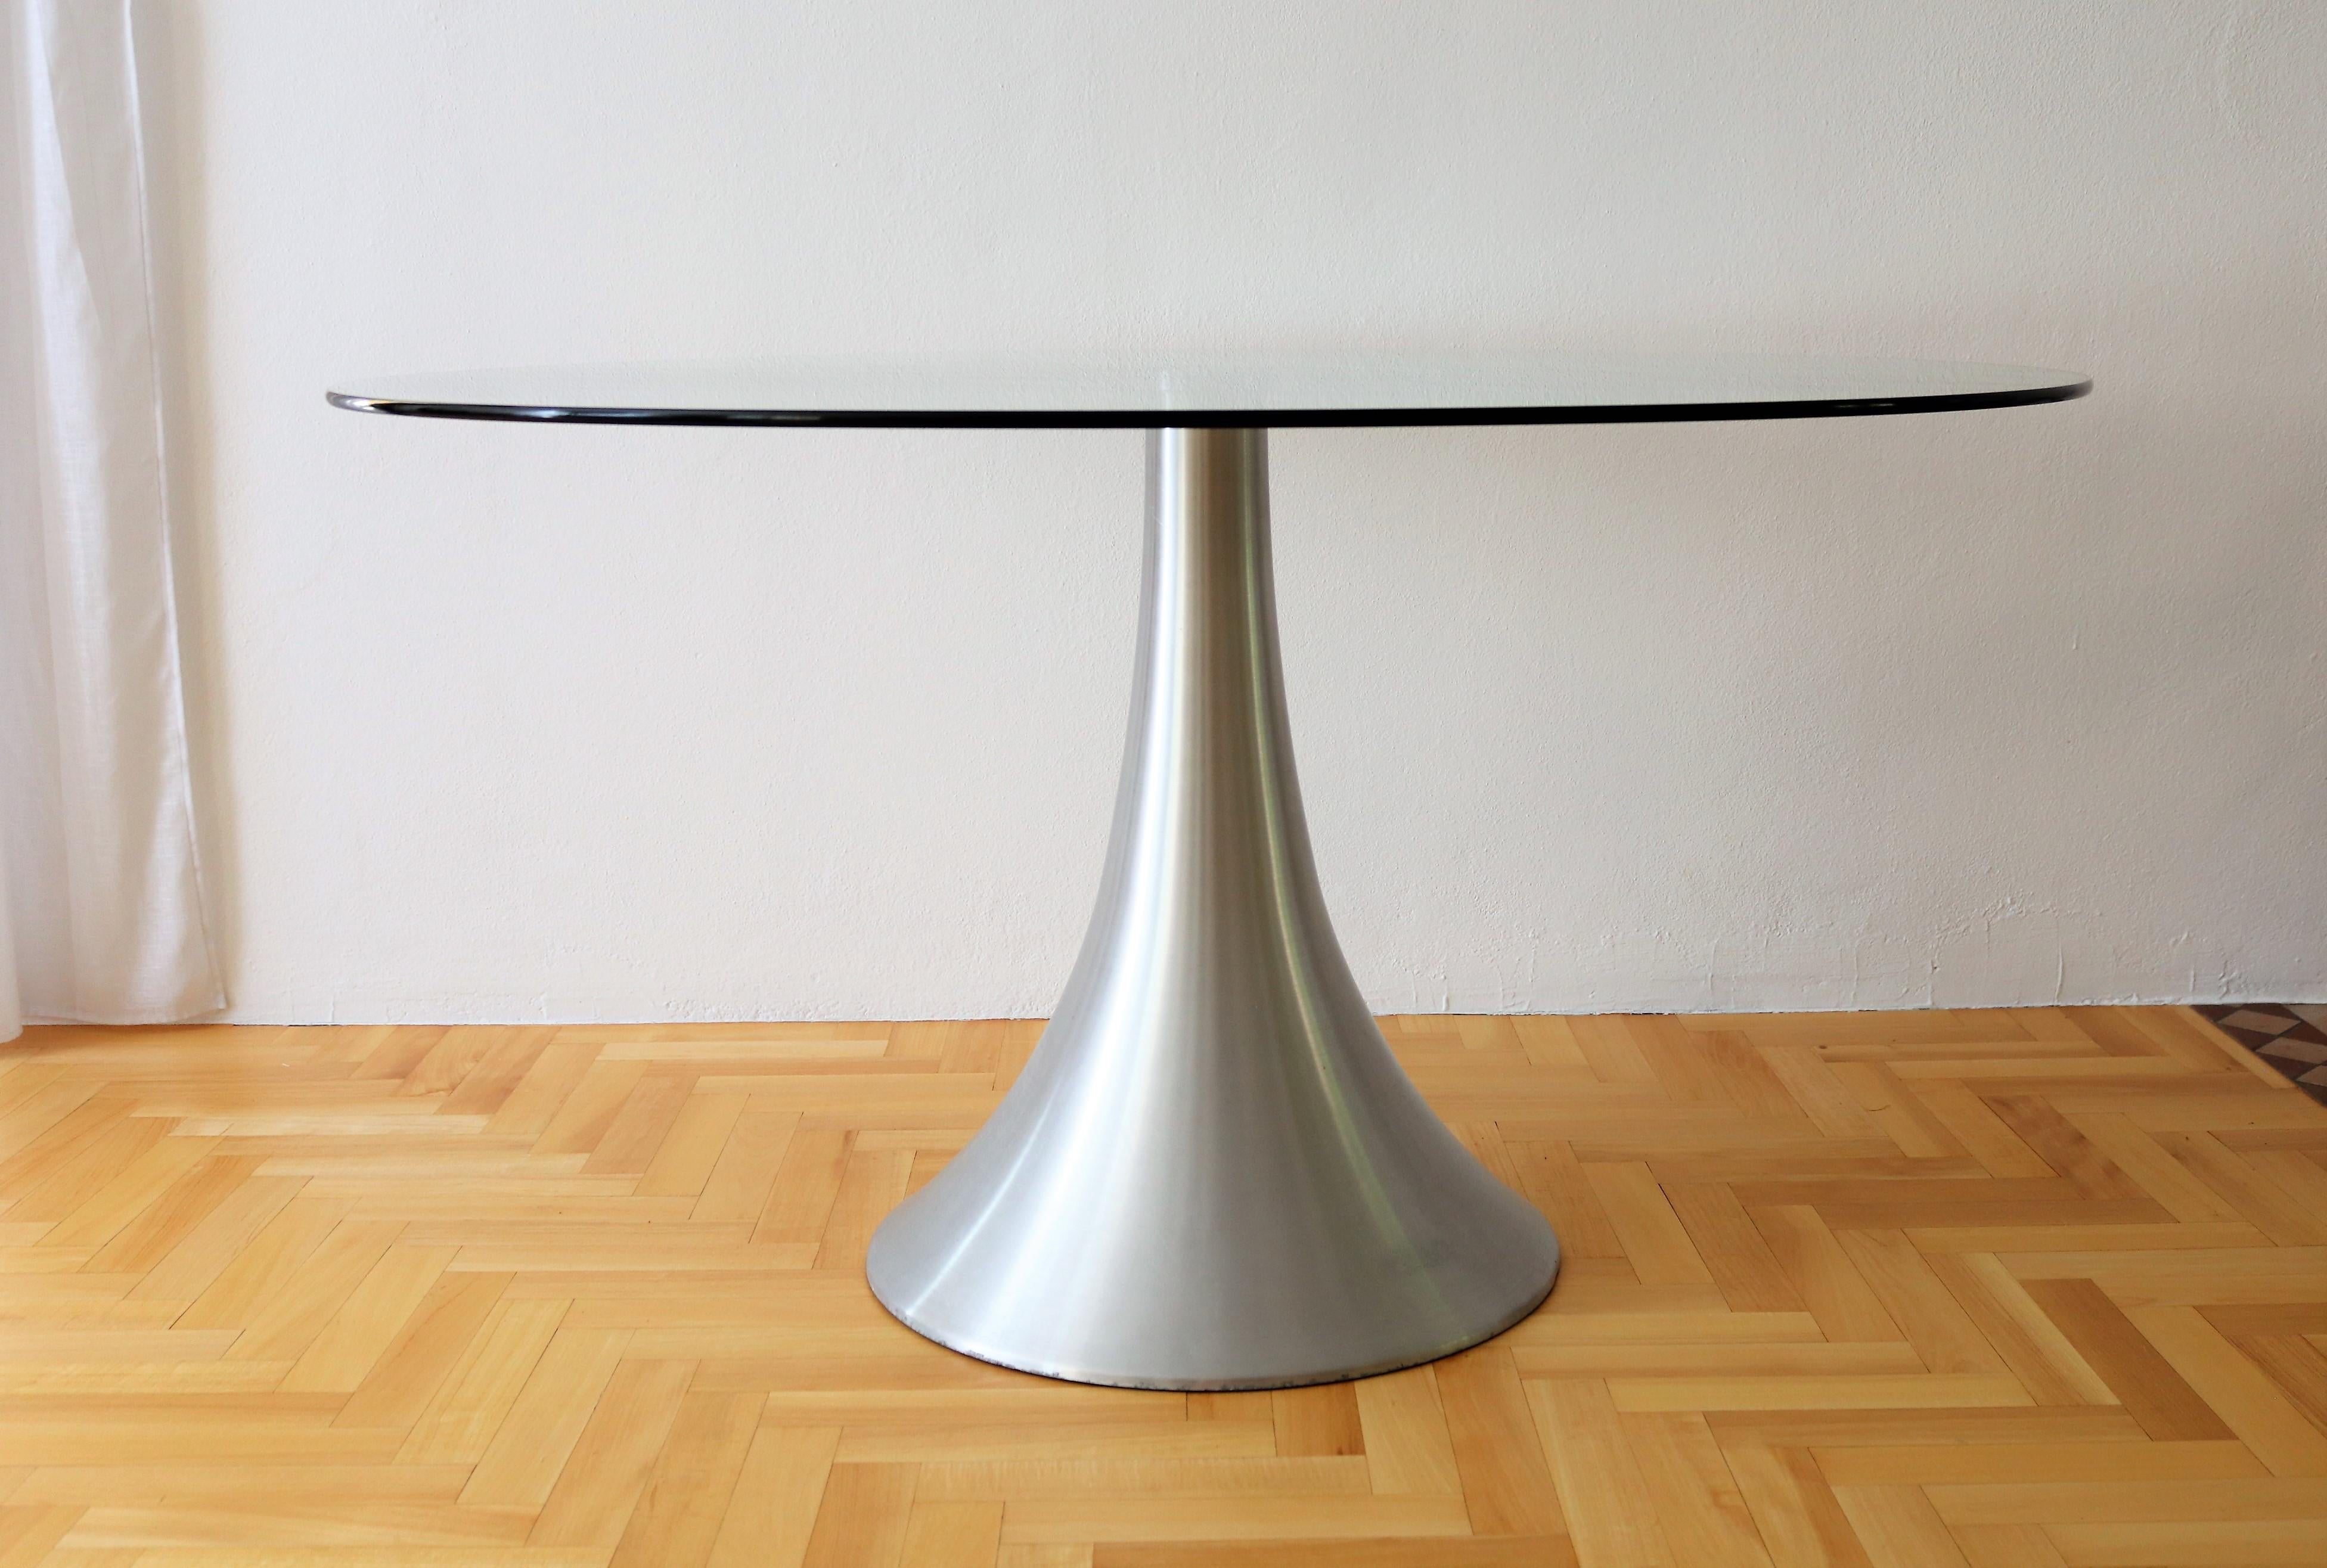 Late 20th Century Italian Dining or Center Table with Tulip Base and Glass Top, 1970s